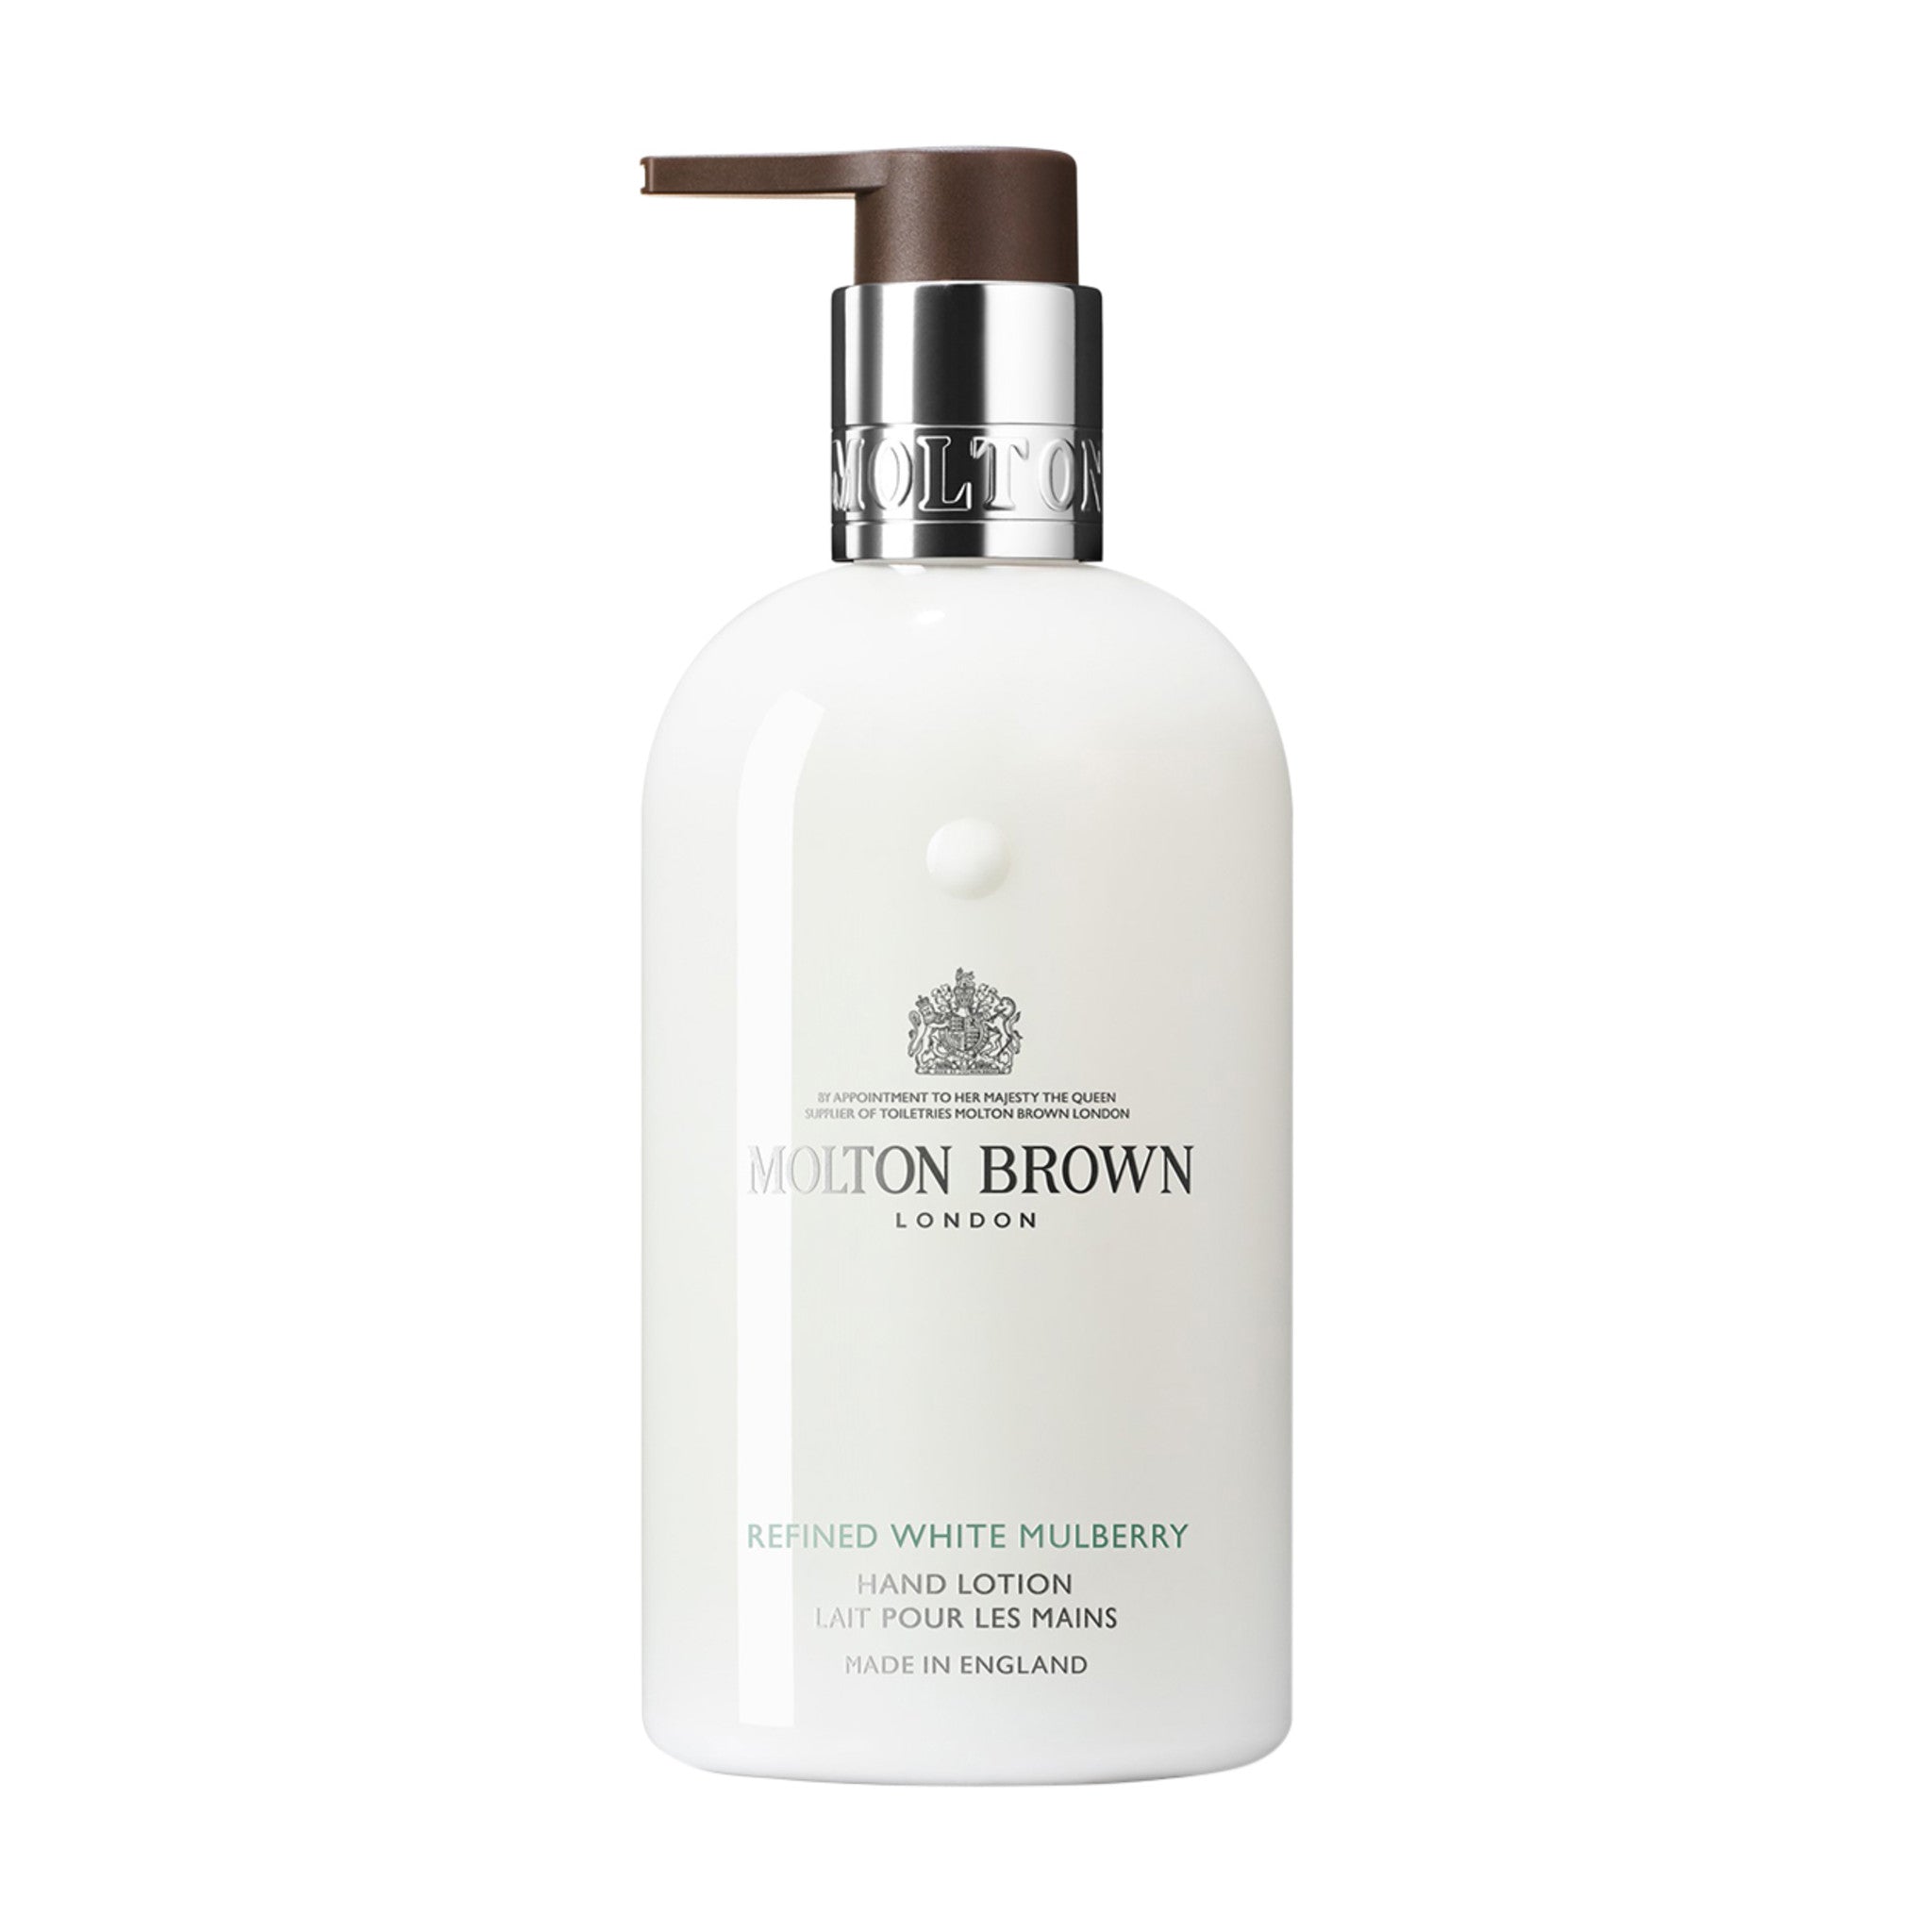 Molton Brown Refined White Mulberry Hand Lotion main image.